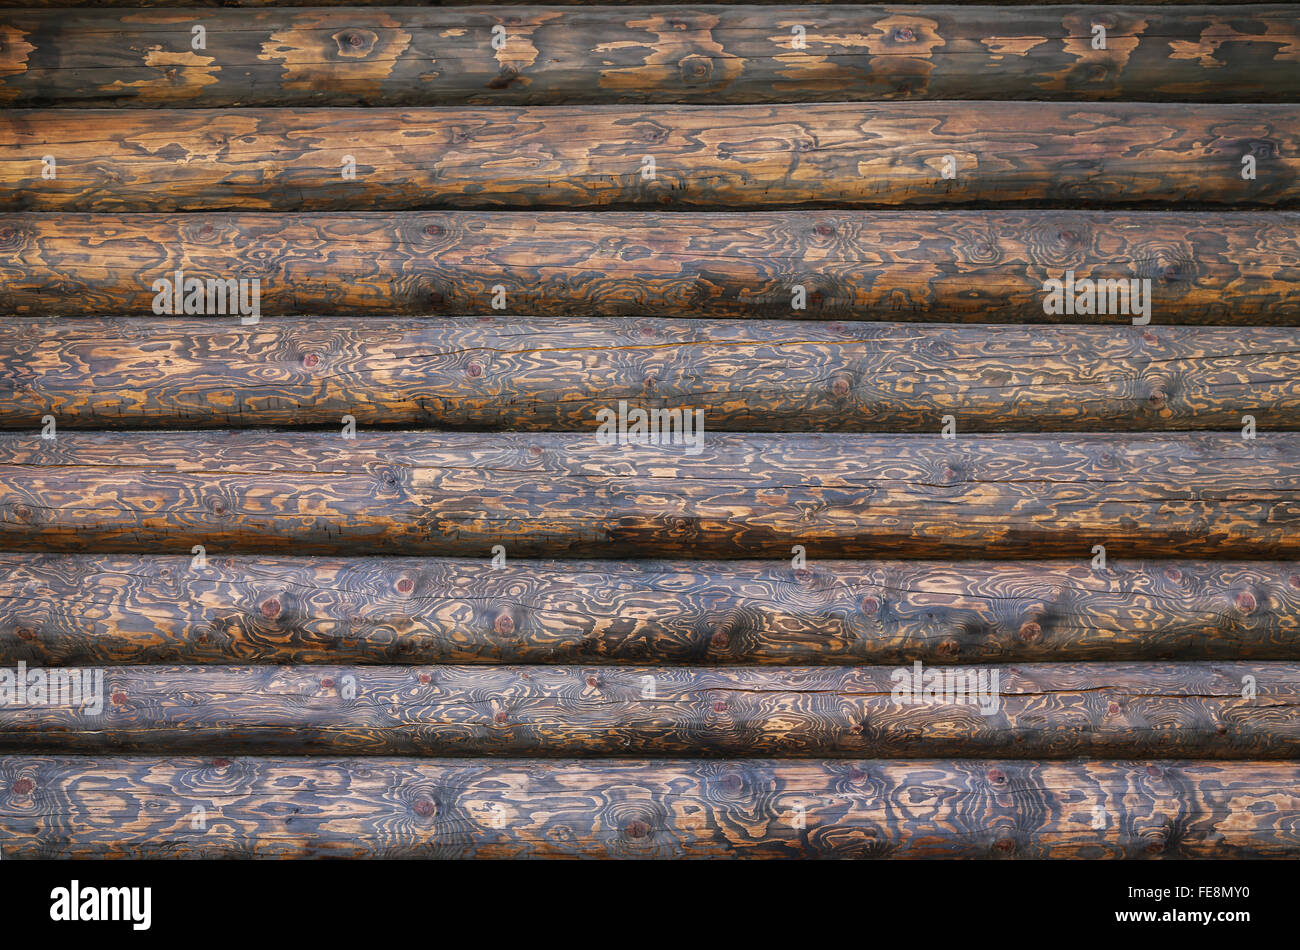 Natural background, wooden logs texture closeup. Logs are treated in a special way, so that their texture strongly contrasting. Stock Photo